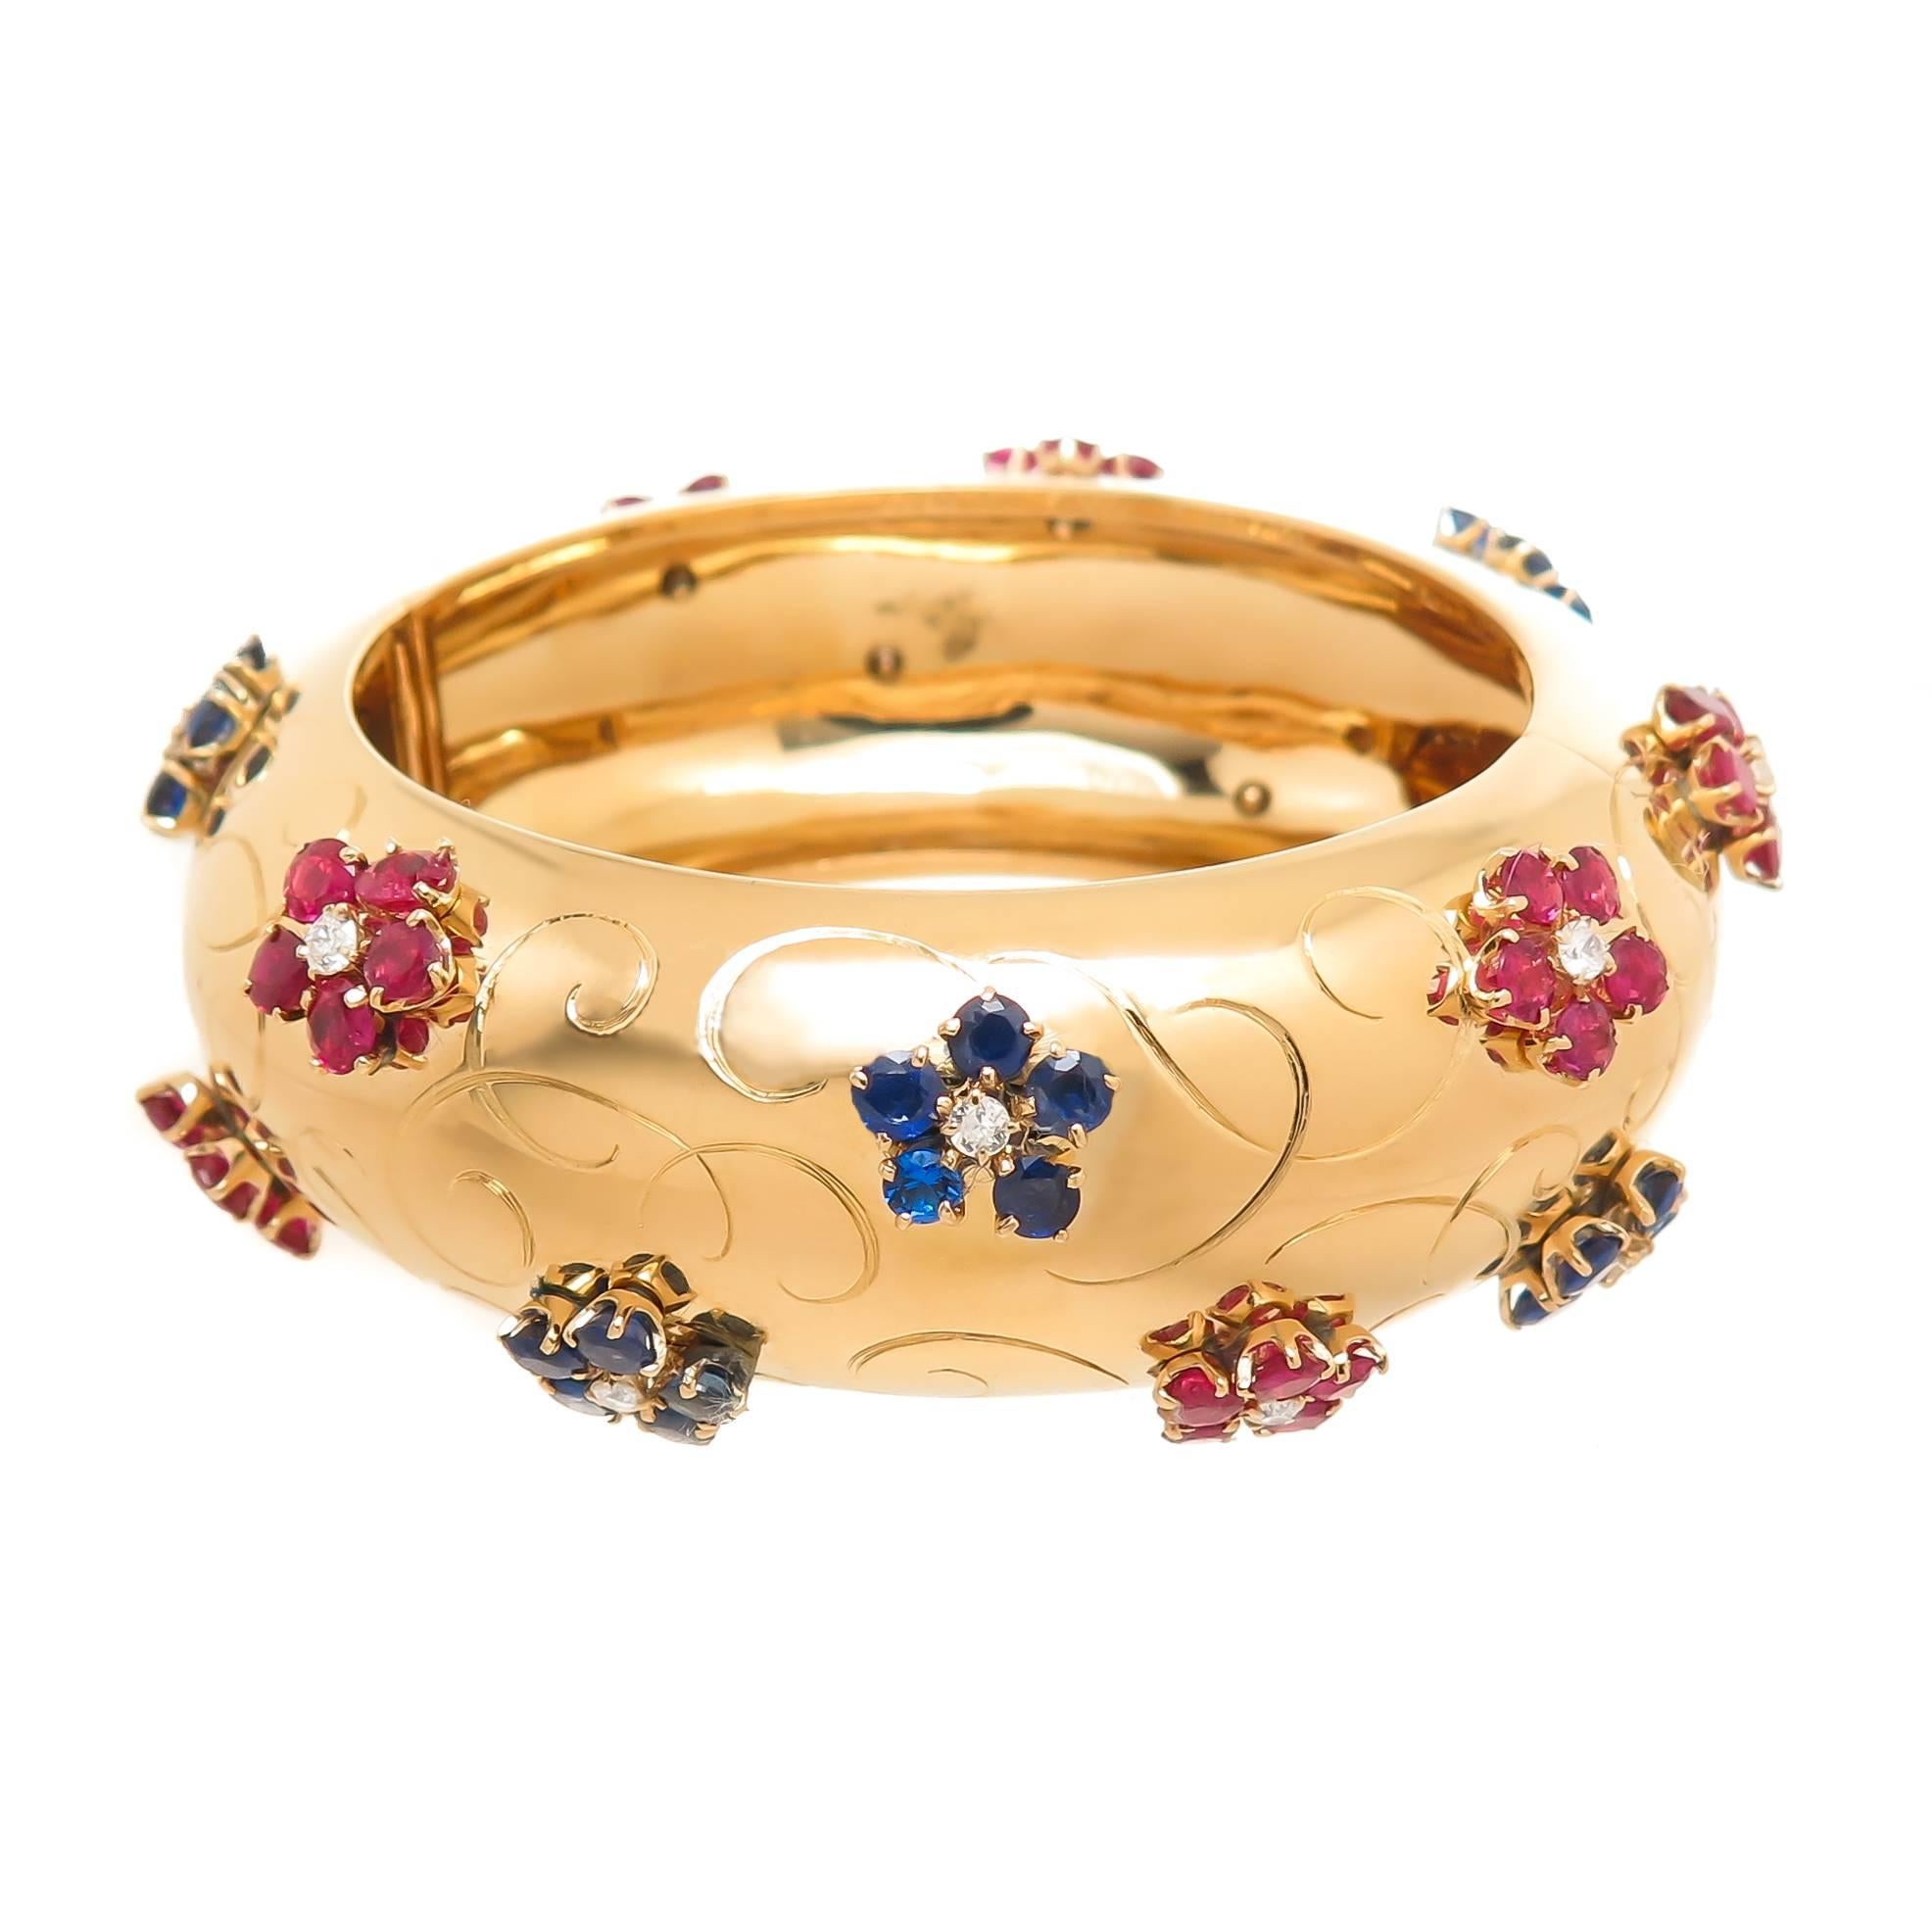 Circa 1940s Van Cleef and Arpels Large and Impressive Bangle Bracelet, in period Patriotic colors and in the design style of John Rubel for VCA. Measuring 1 inch wide with an inside measurement of 6 1/4 inch and weighing 93 Grams. Set with Fine